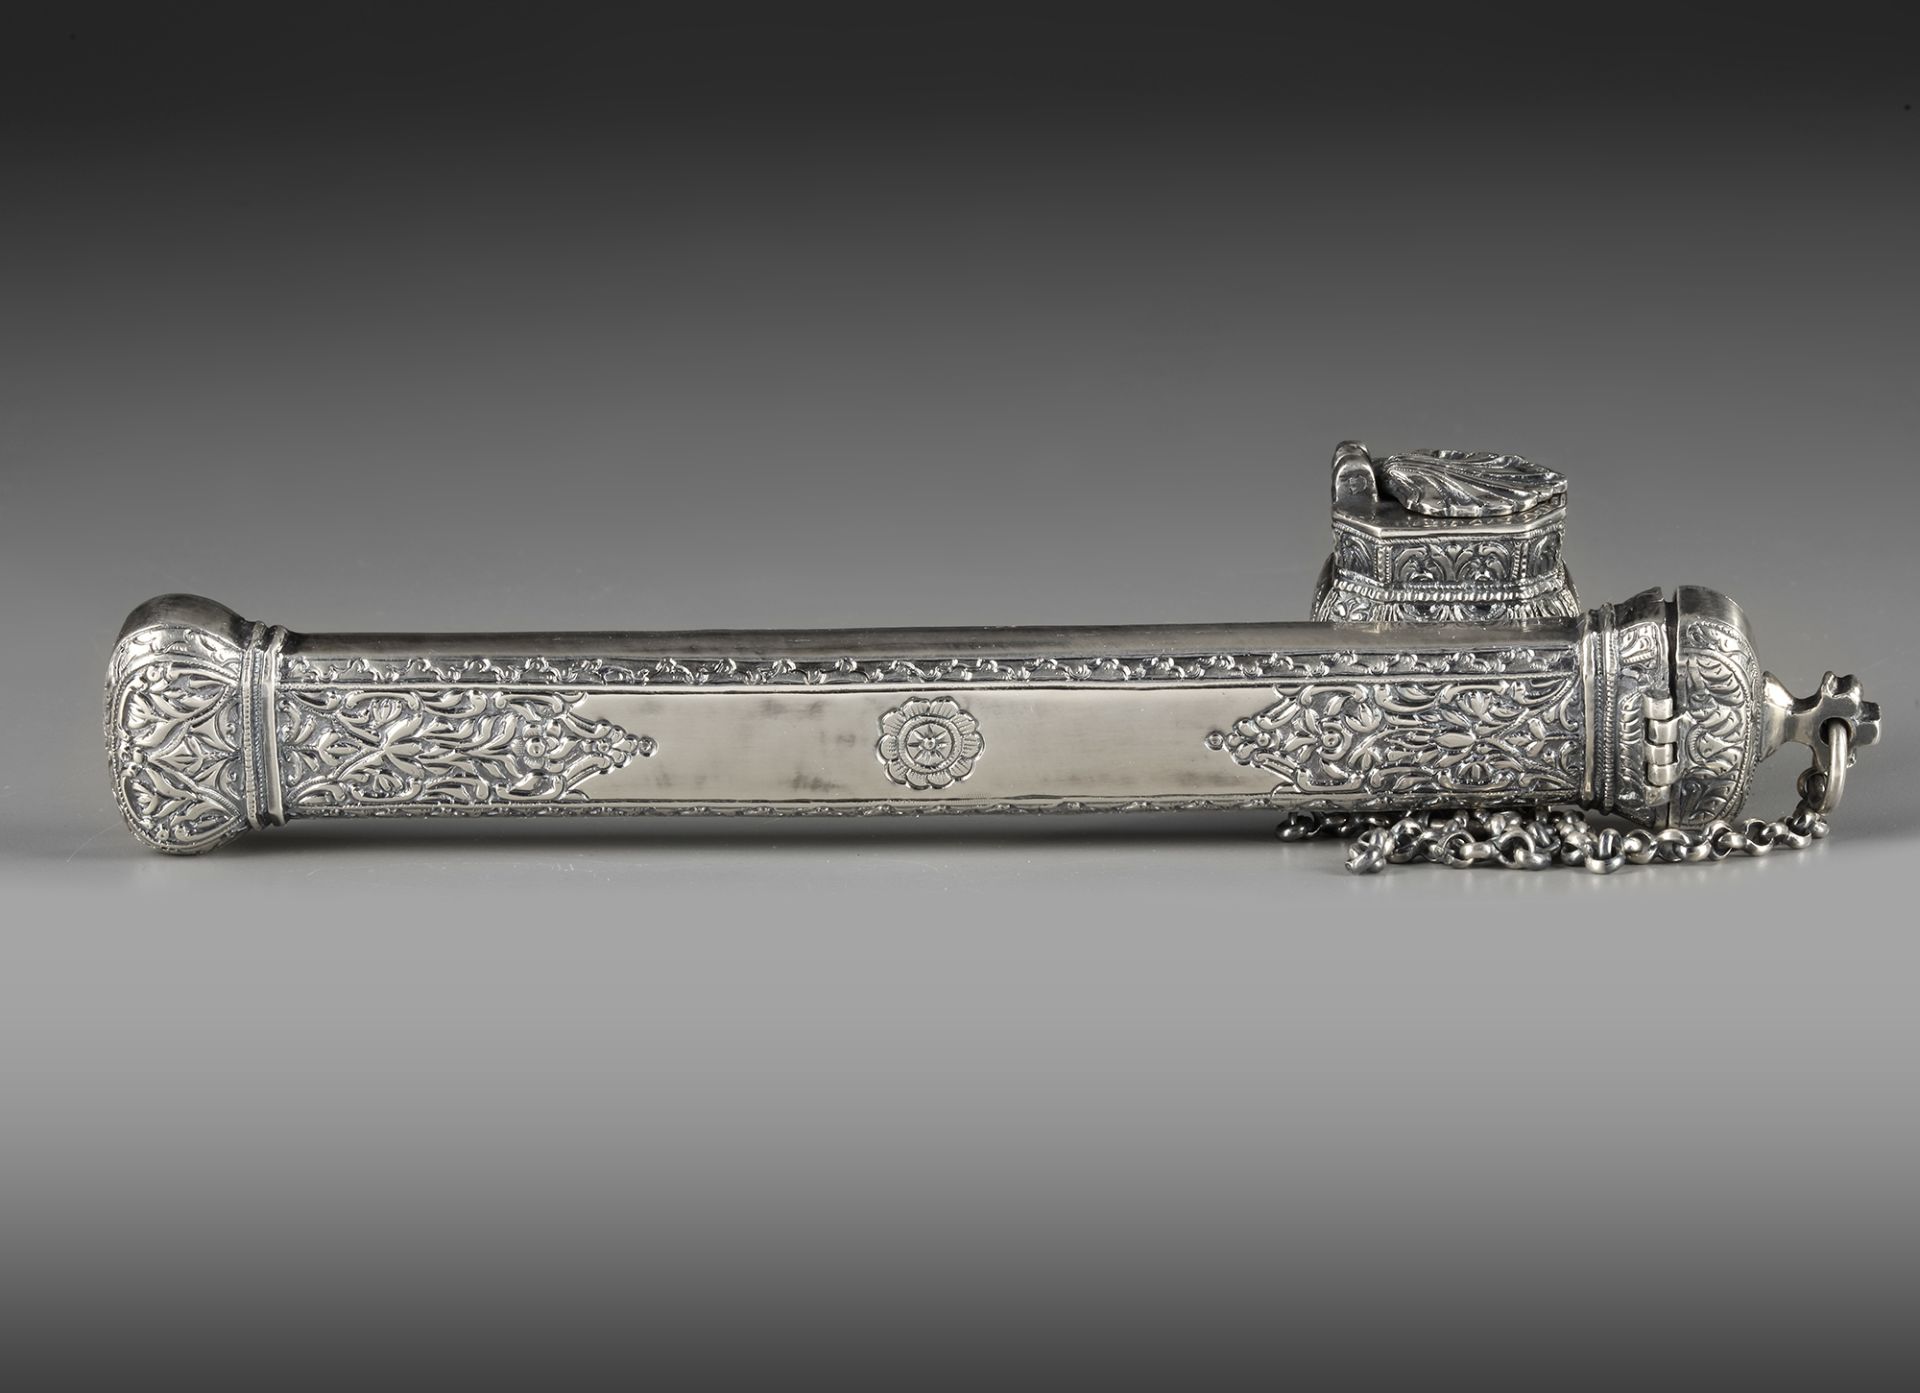 A SILVER PENCASE (DIVIT) OTTOMAN GREECE, LATE 18TH-EARLY 19TH CENTURY - Image 3 of 5